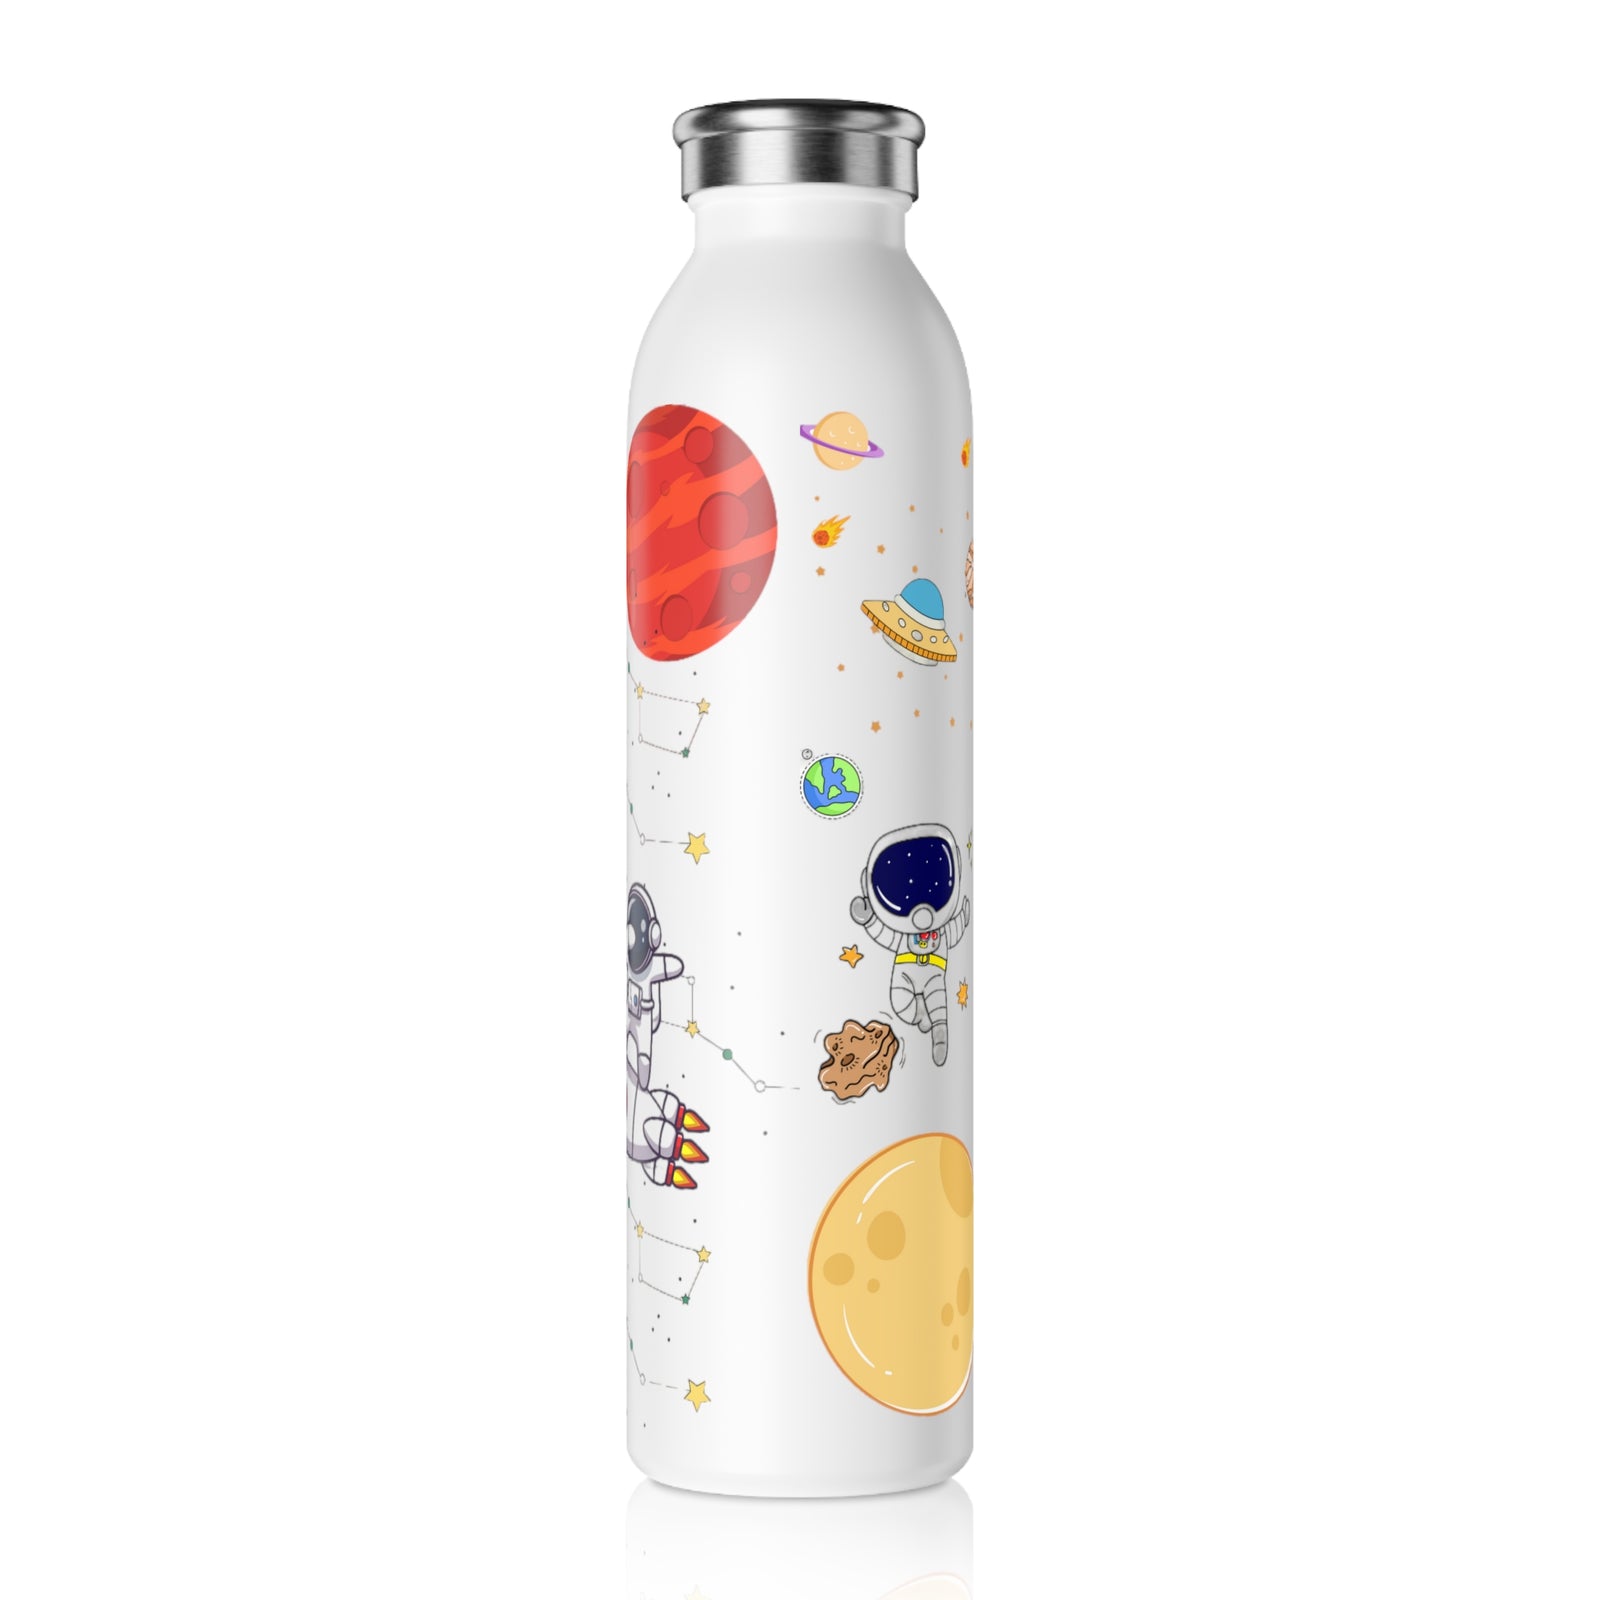 Explore the Cosmos Stainless Steel Water Bottle - Stars, Planets, Galaxies, Astronauts, and Rocket Ship Fun for Kids and Parents - TryKid's Cool and Trending New Design